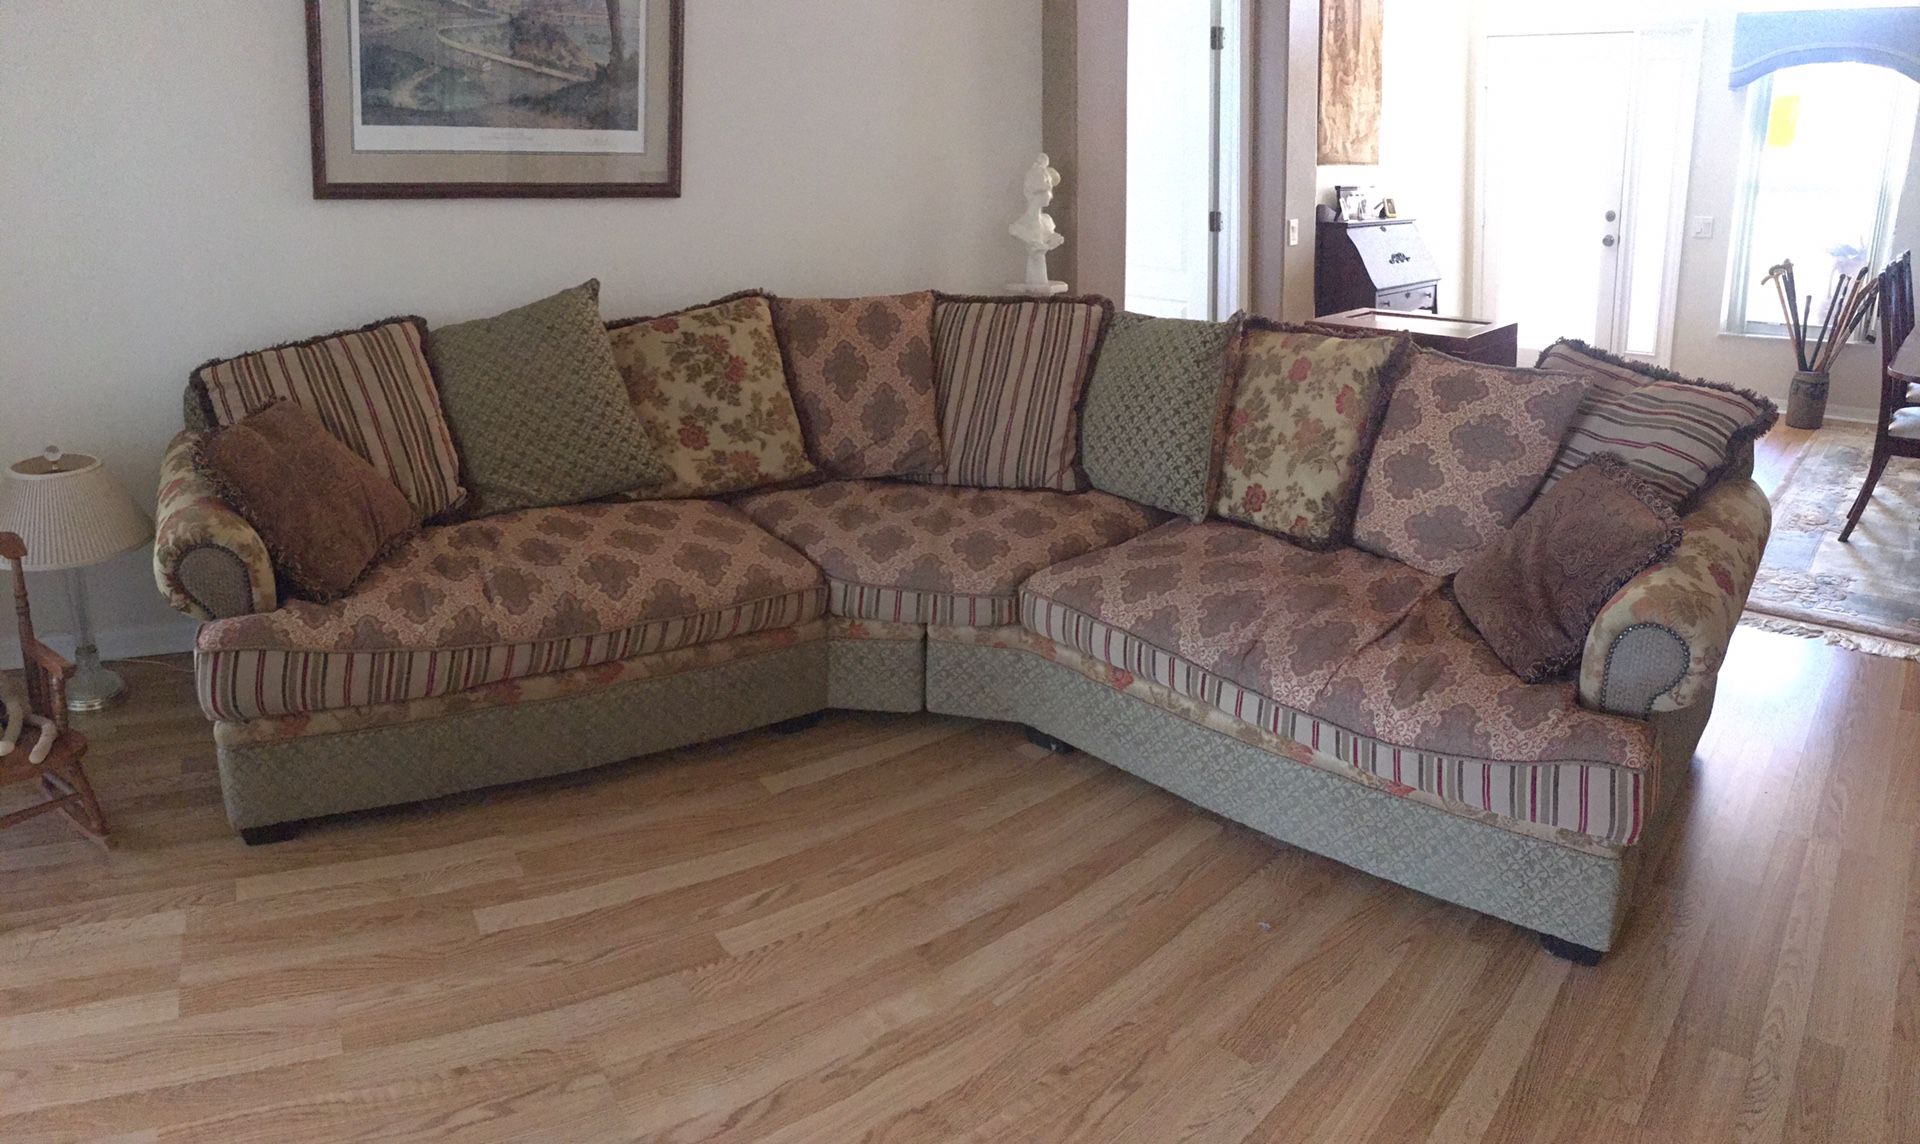 Large Down Sectional Couch